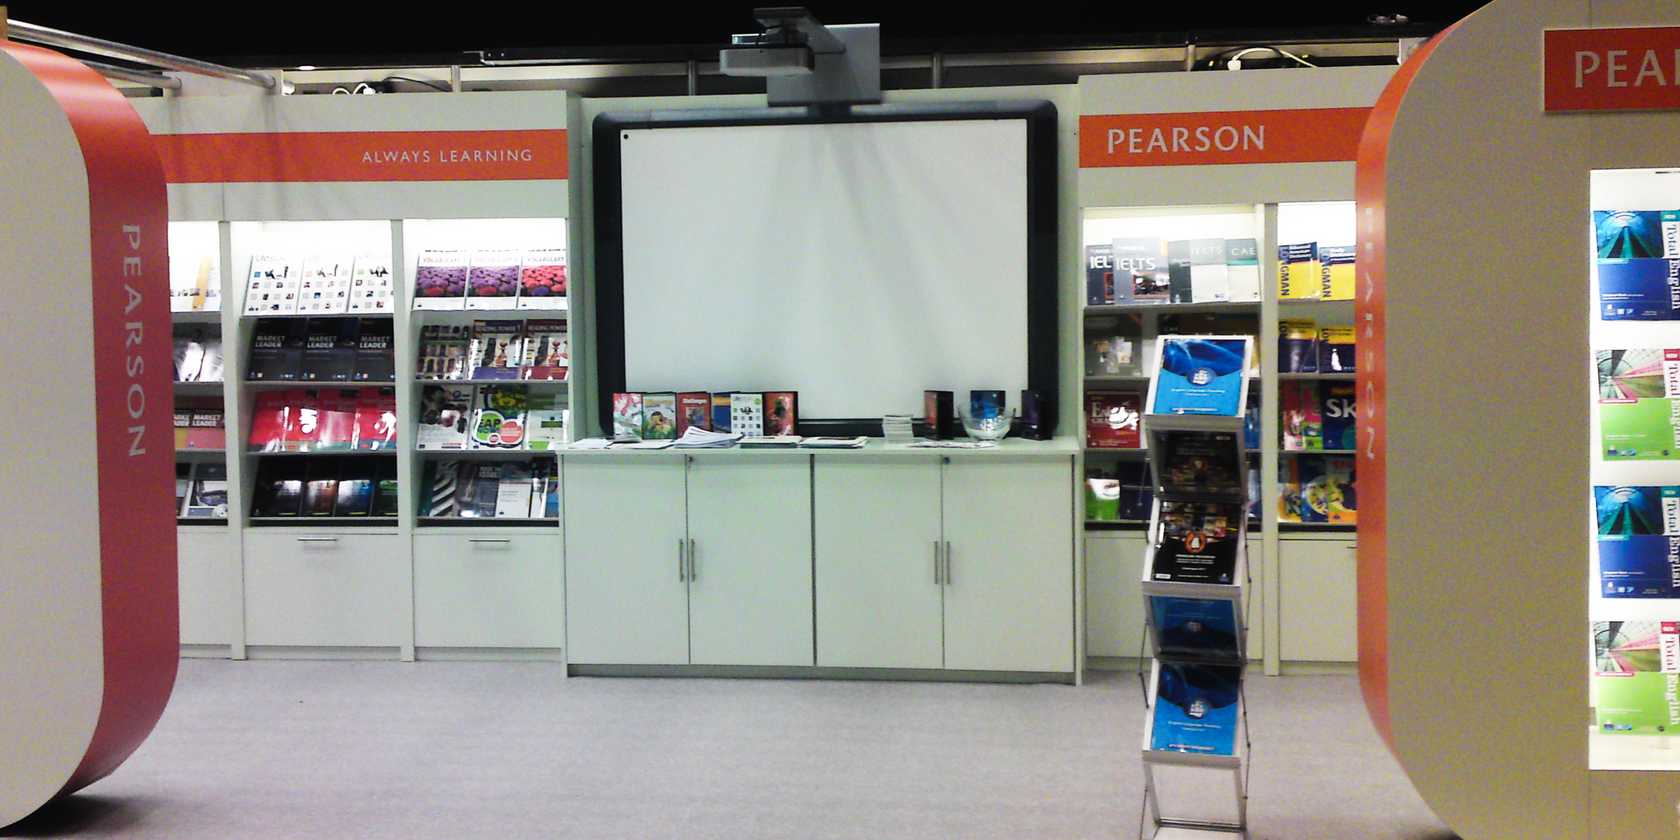 Custom Built Exhibition Stand for Pearson